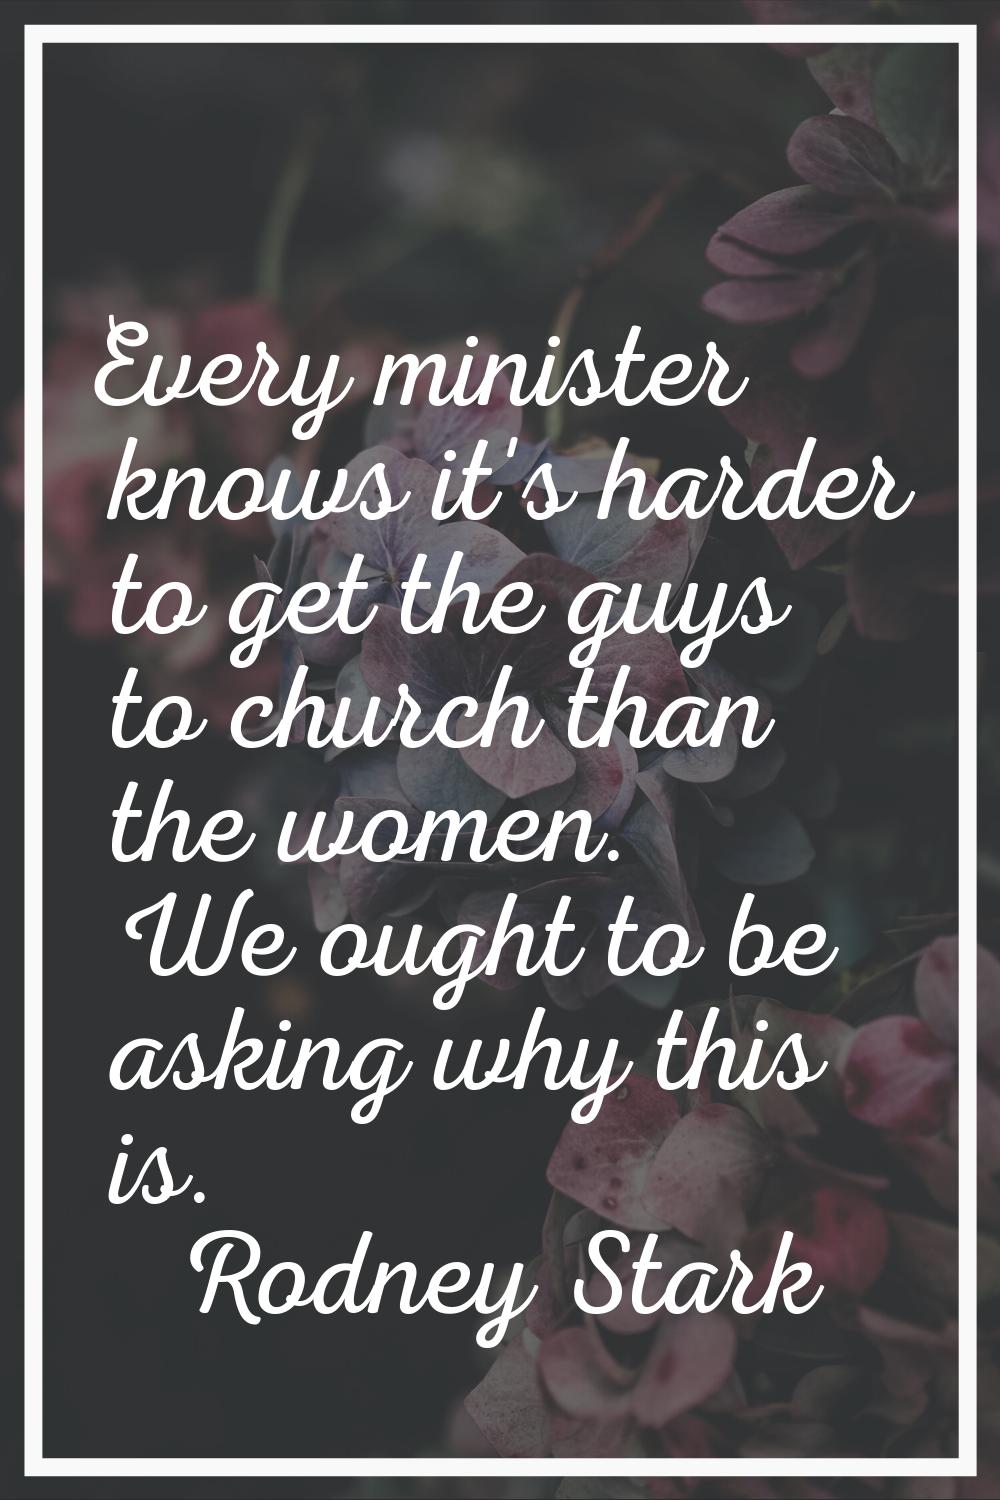 Every minister knows it's harder to get the guys to church than the women. We ought to be asking wh